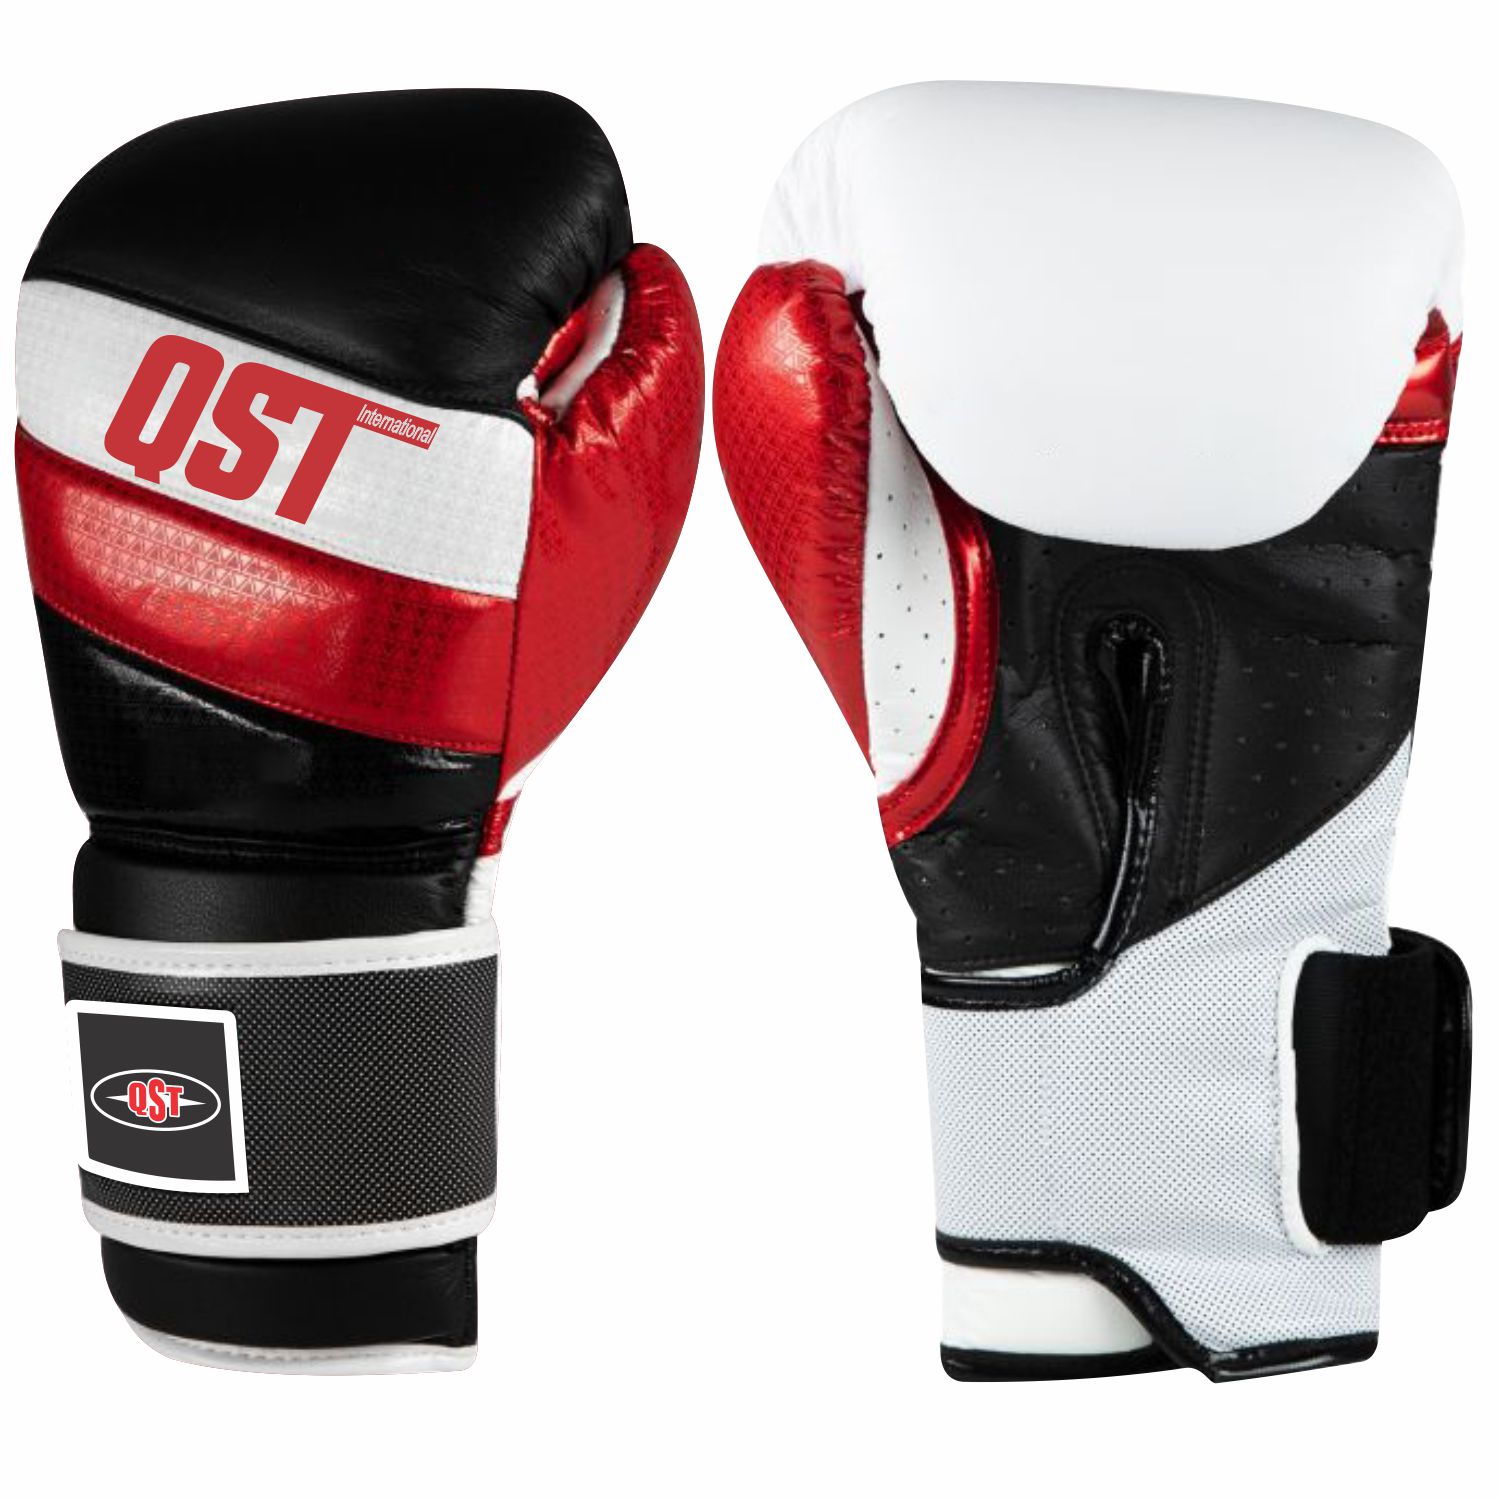 Professional Boxing Gloves - PRG-1515